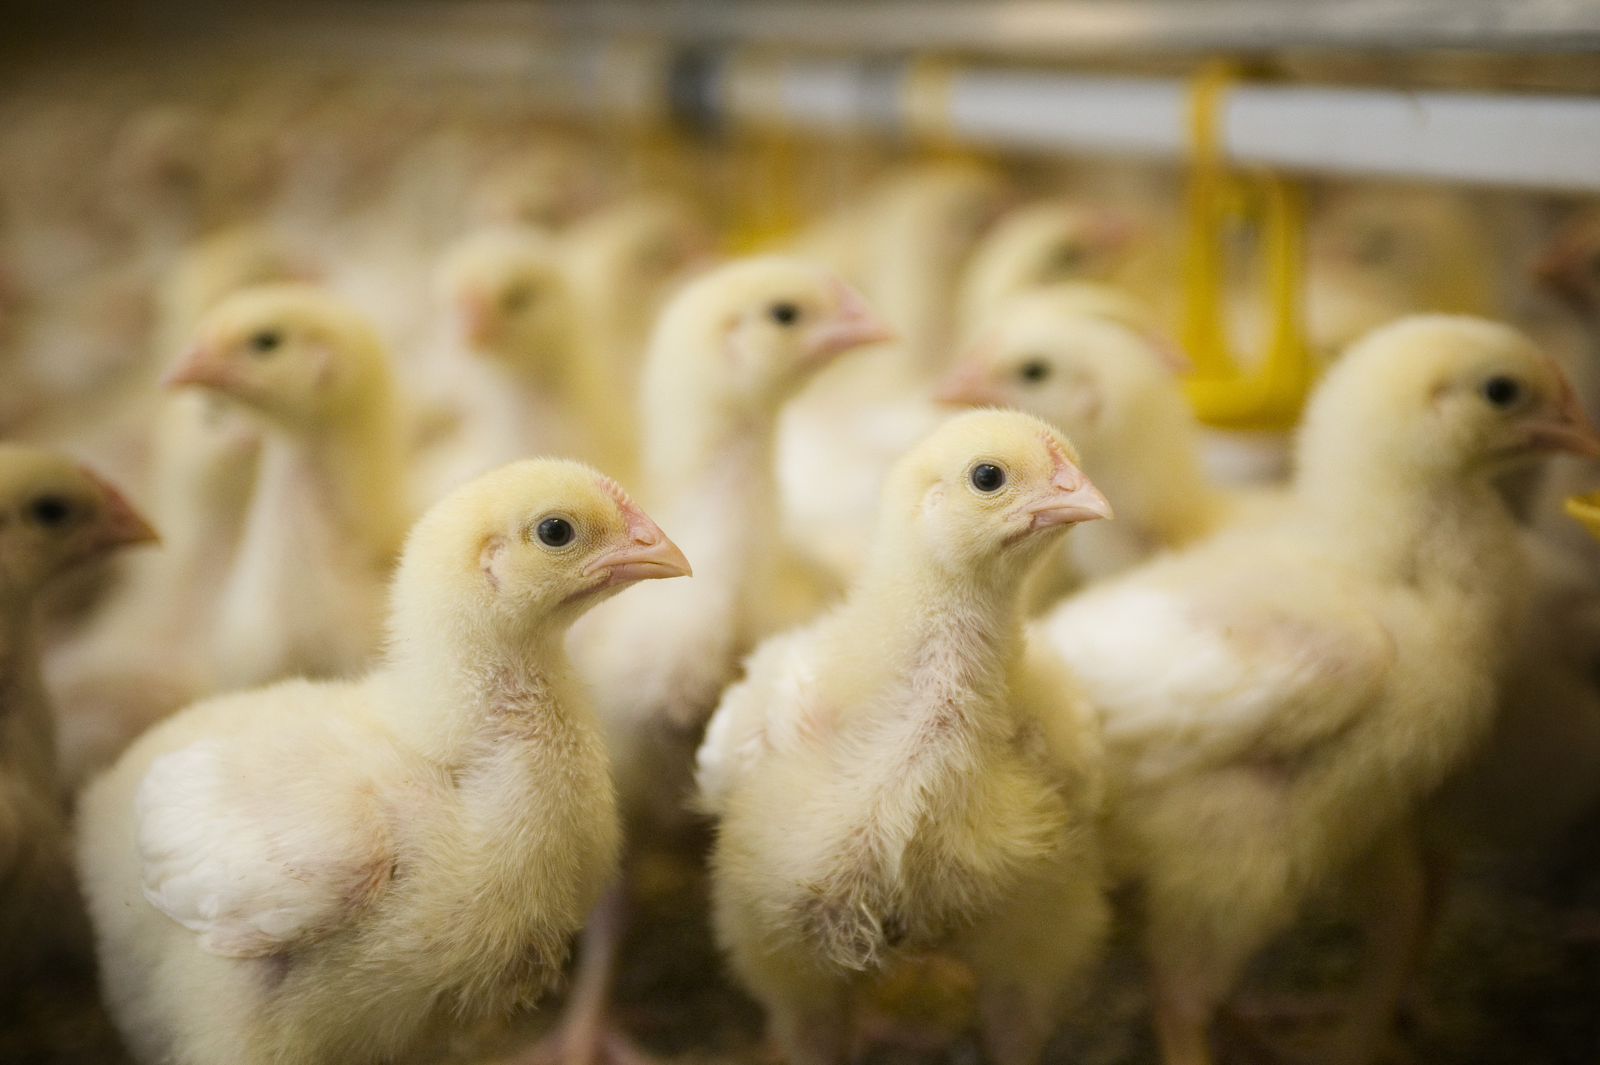 Xylanase improves gut health in poultry